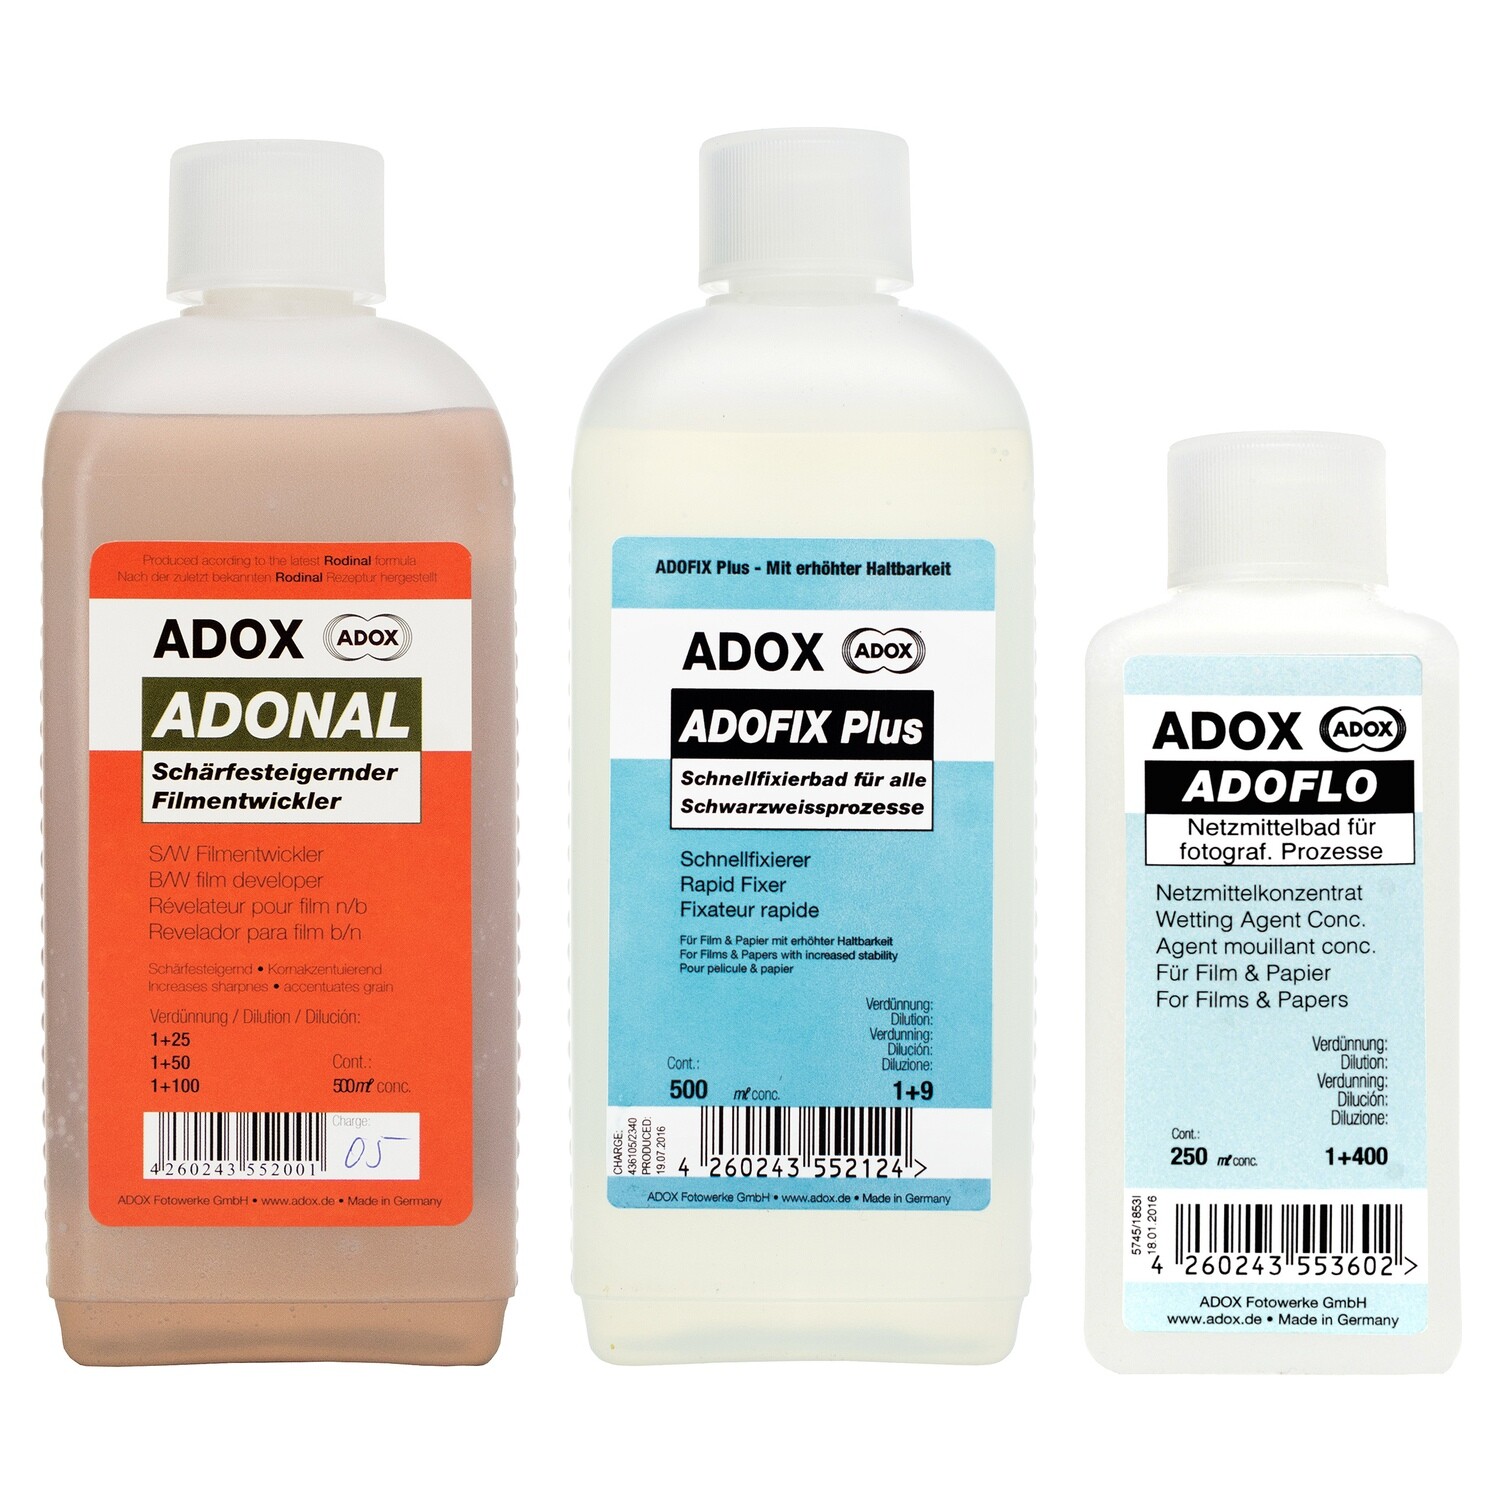 Kit consisting of ADOX RODINAL 2x 500 ml concentrate + ADOX ADOFIX Plus express fixative 2x 500 ml concentrate + ADOX ADOFLO II wetting agent 500 ml concentrate